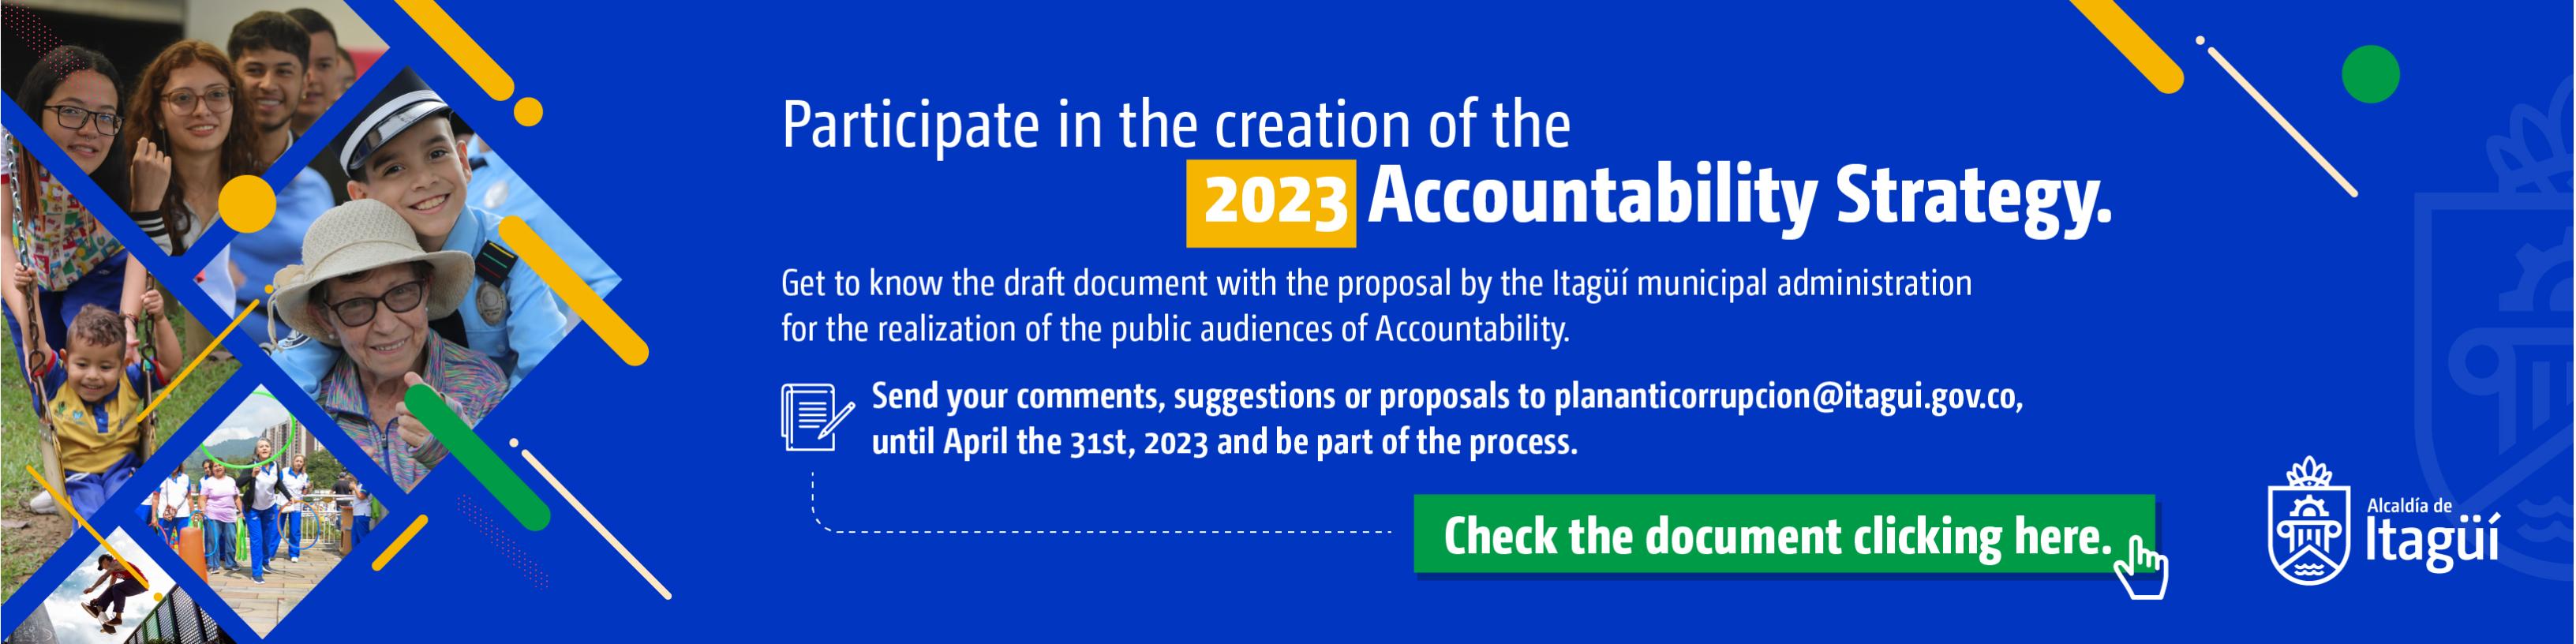 Get to know the draft document of the 2023 accountability strategy and send your comments, suggestions or proposals to plananticorrupcion@itagui.gov.co until April 31, 2023